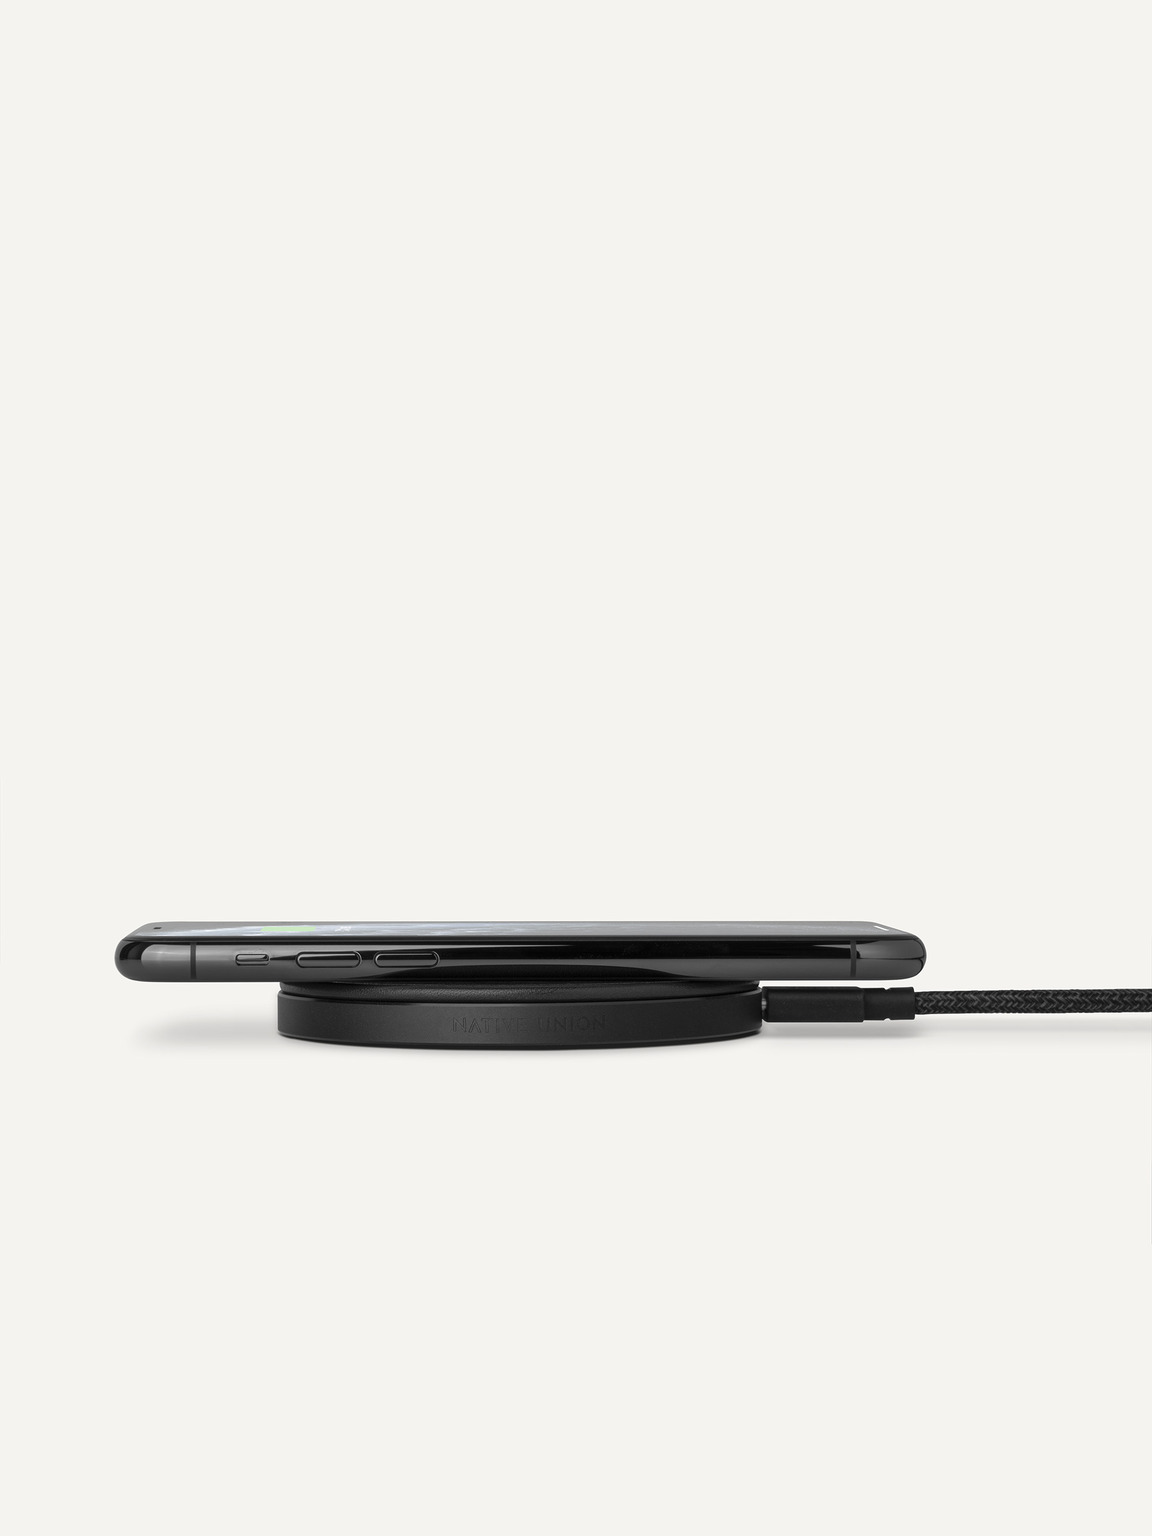 Leather Drop Wireless Charger, Black